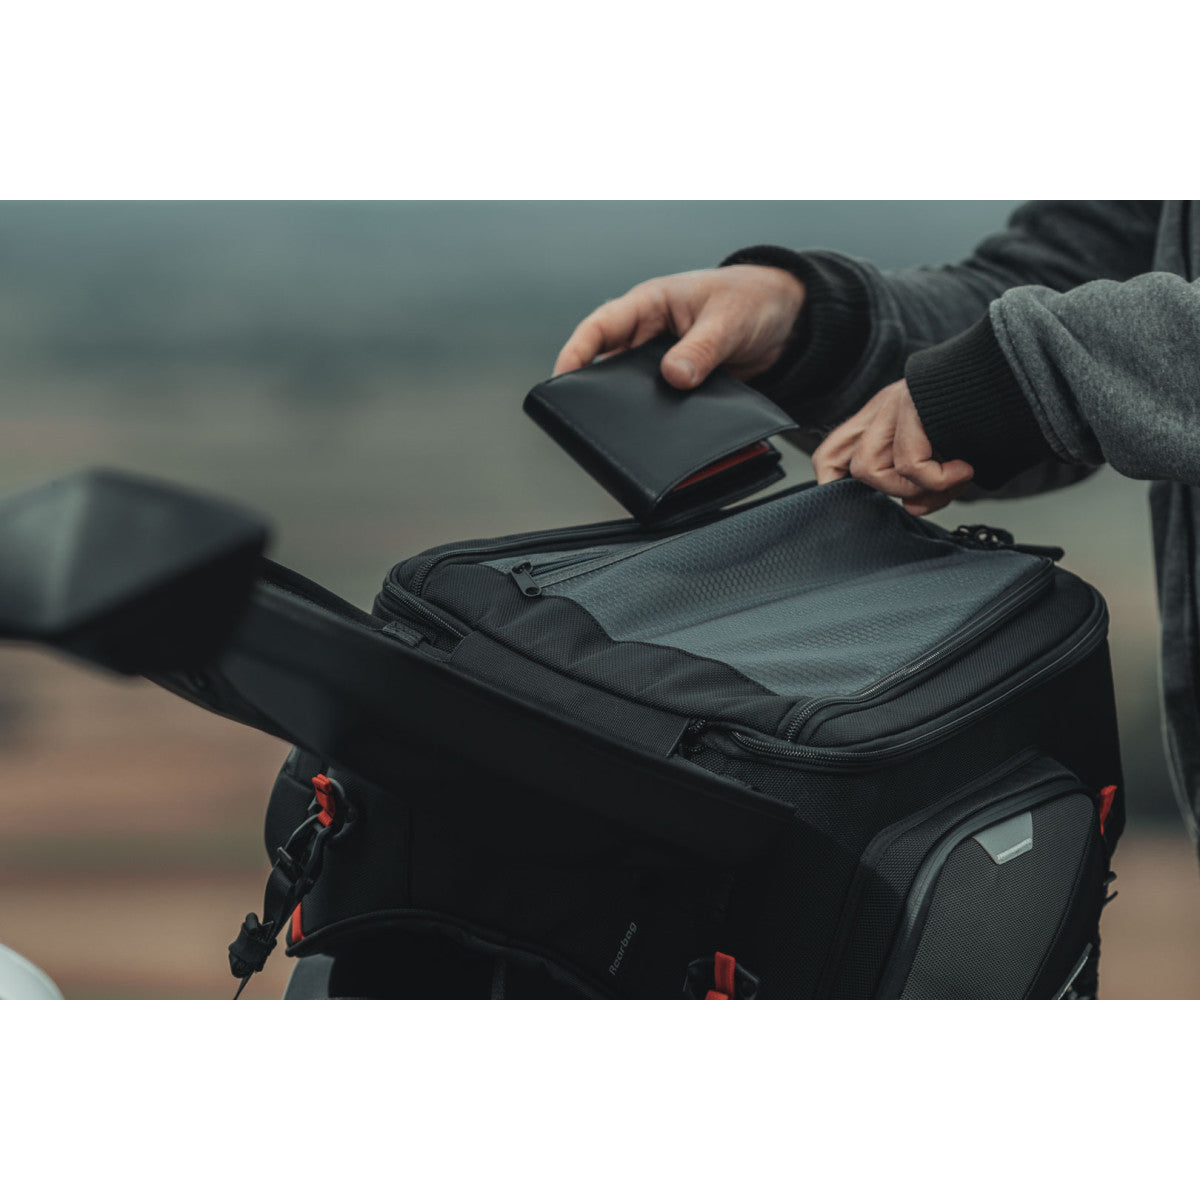 Pro Achterbag Tail Bag